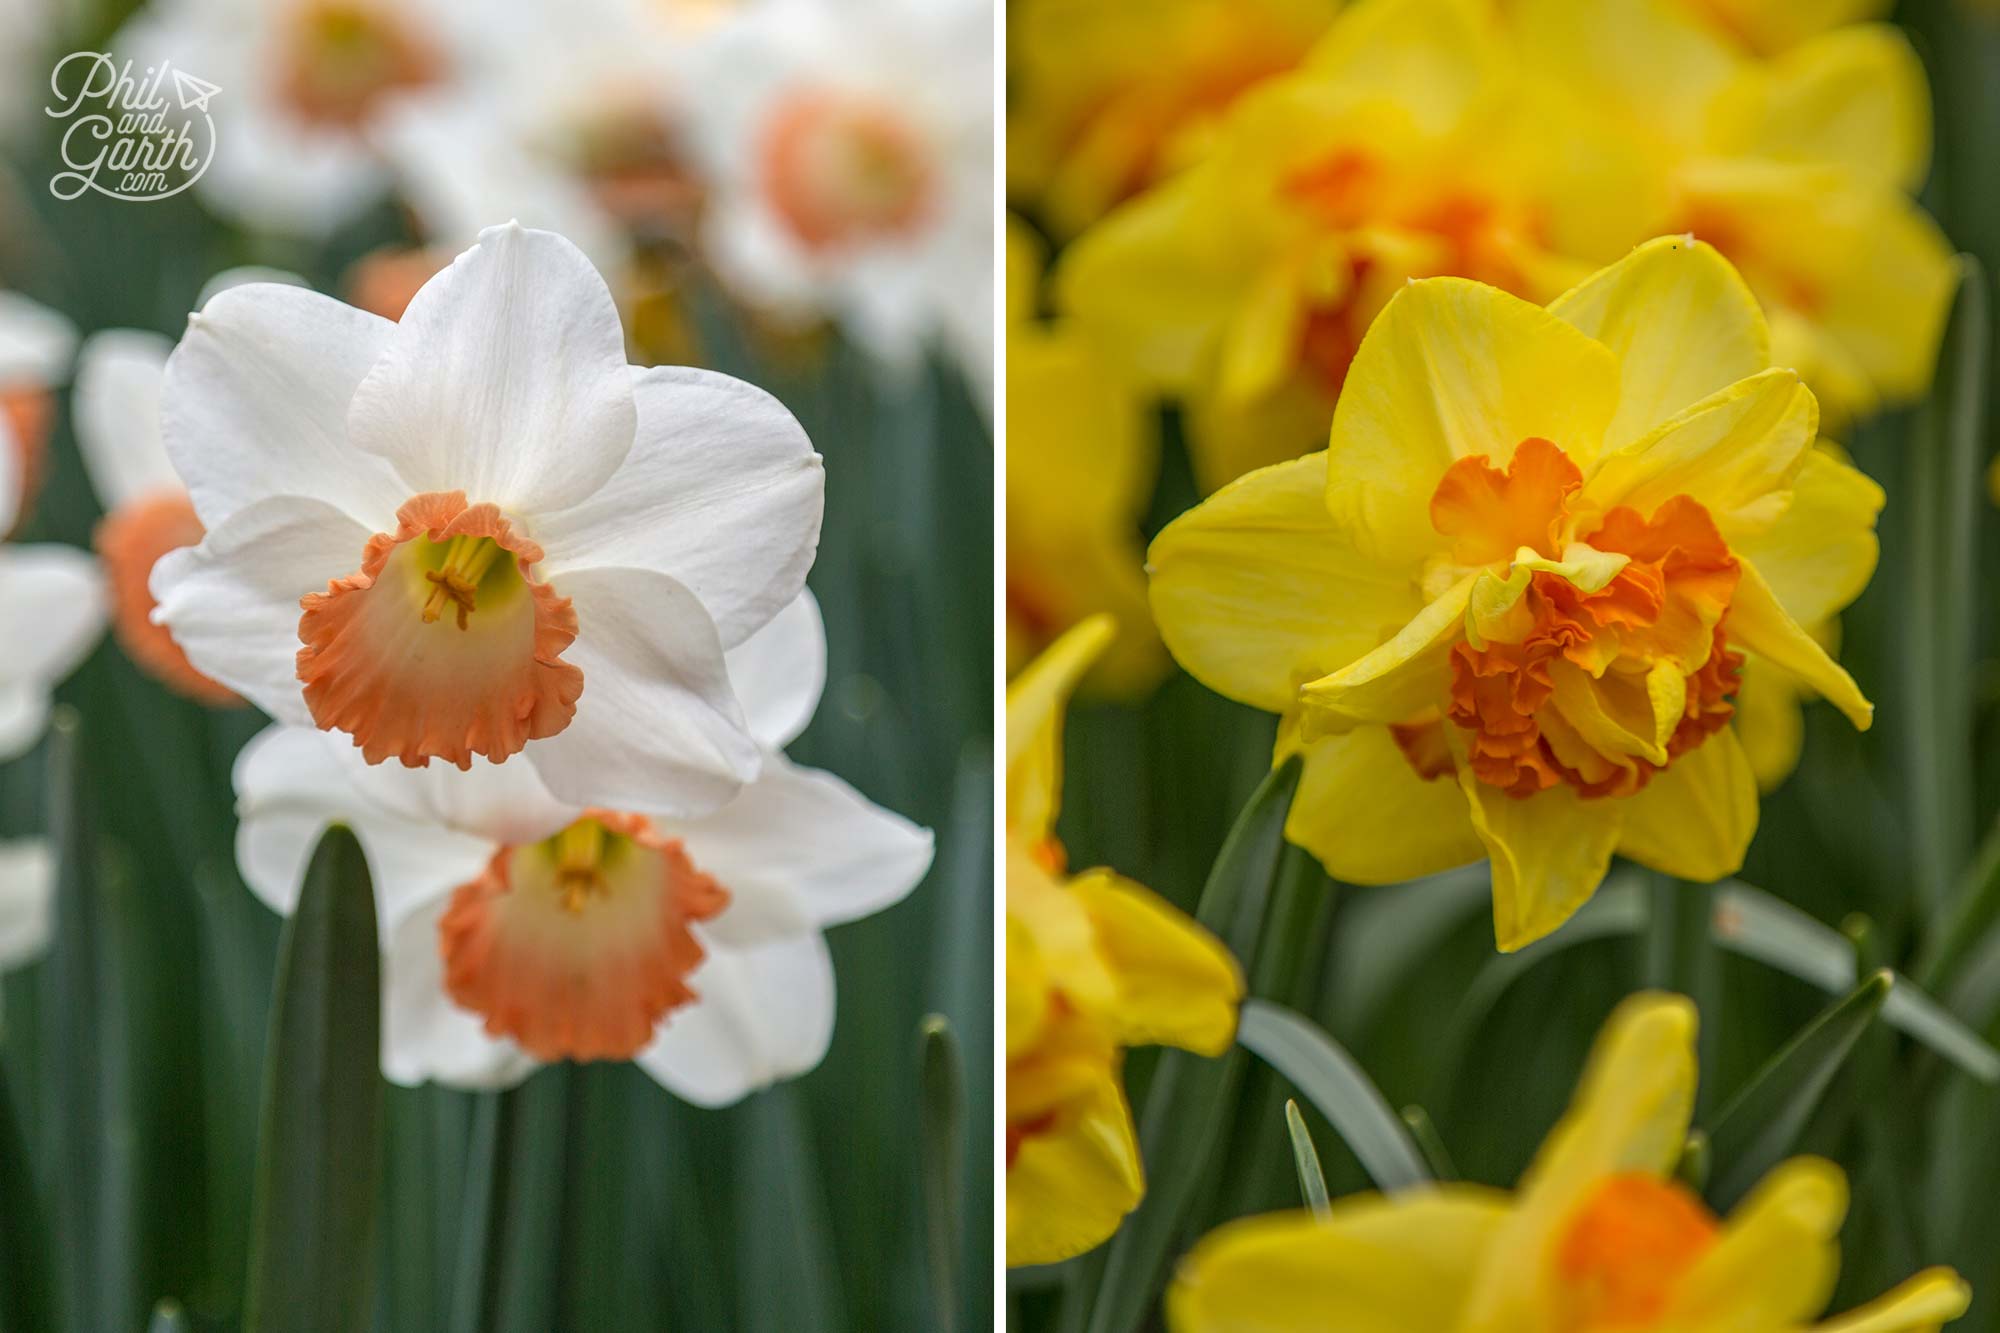 Two types of narcissus